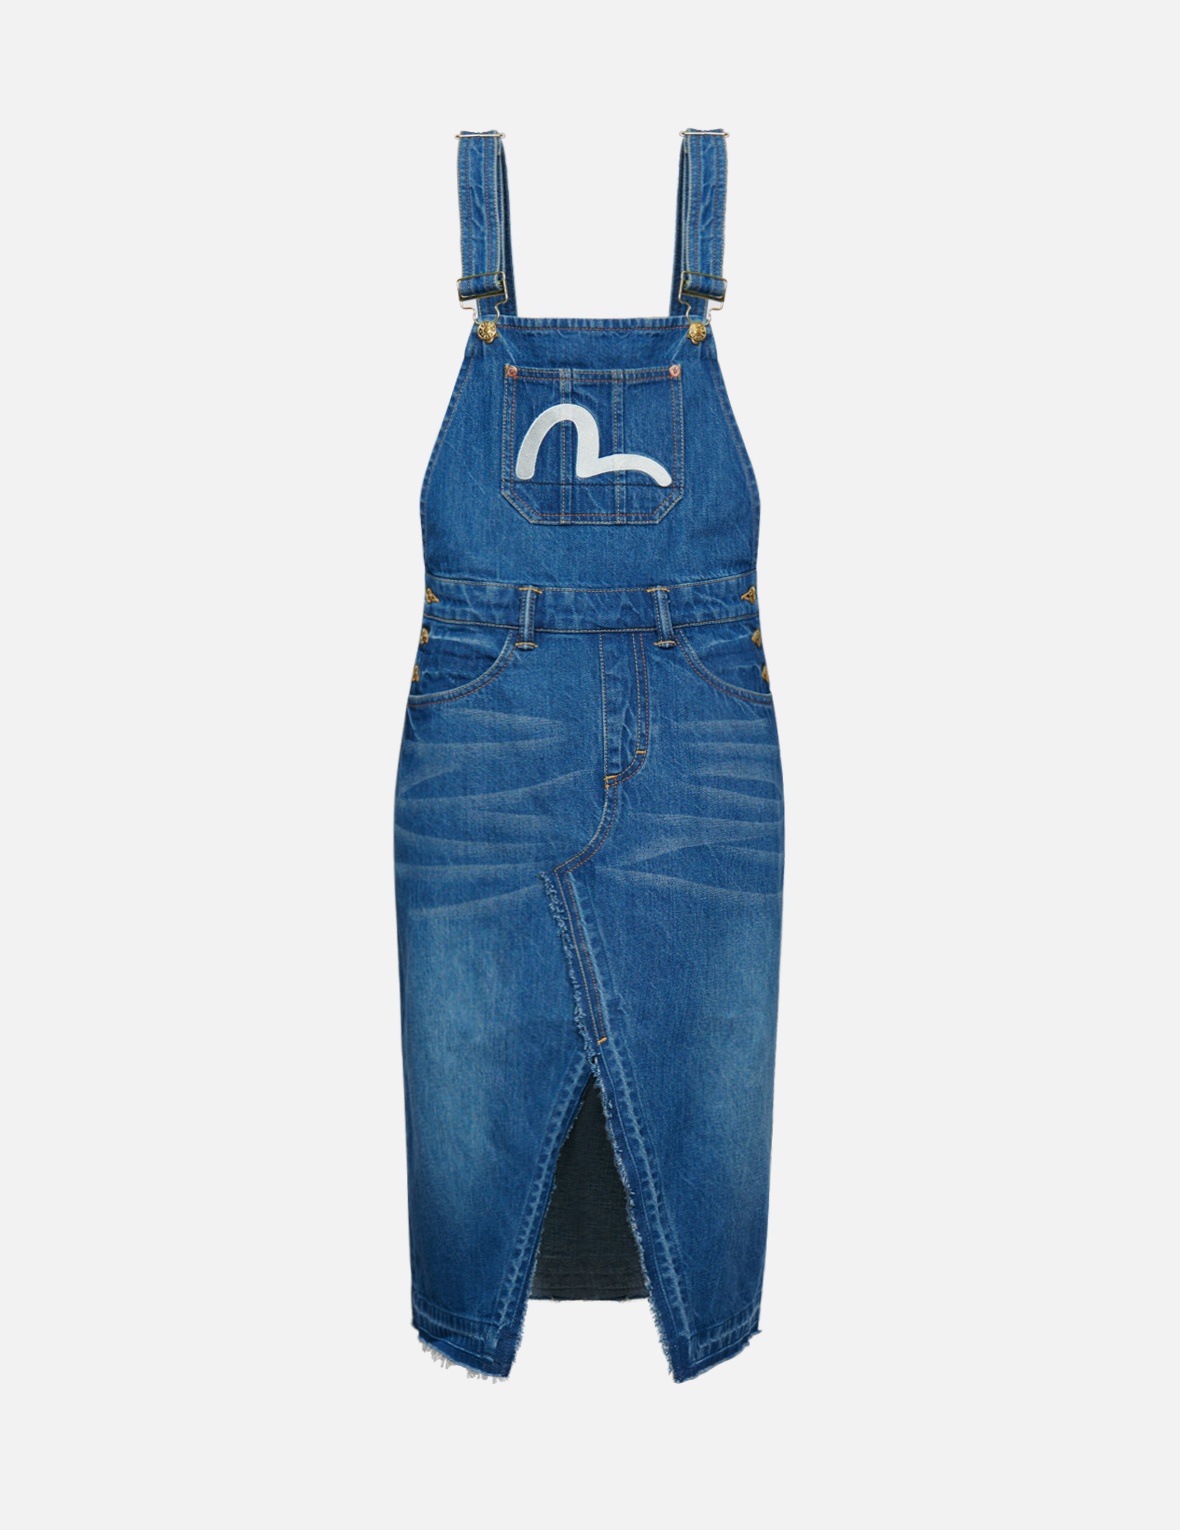 SEAGULL EMBROIDERED DENIM DUNGAREE DRESS - 1